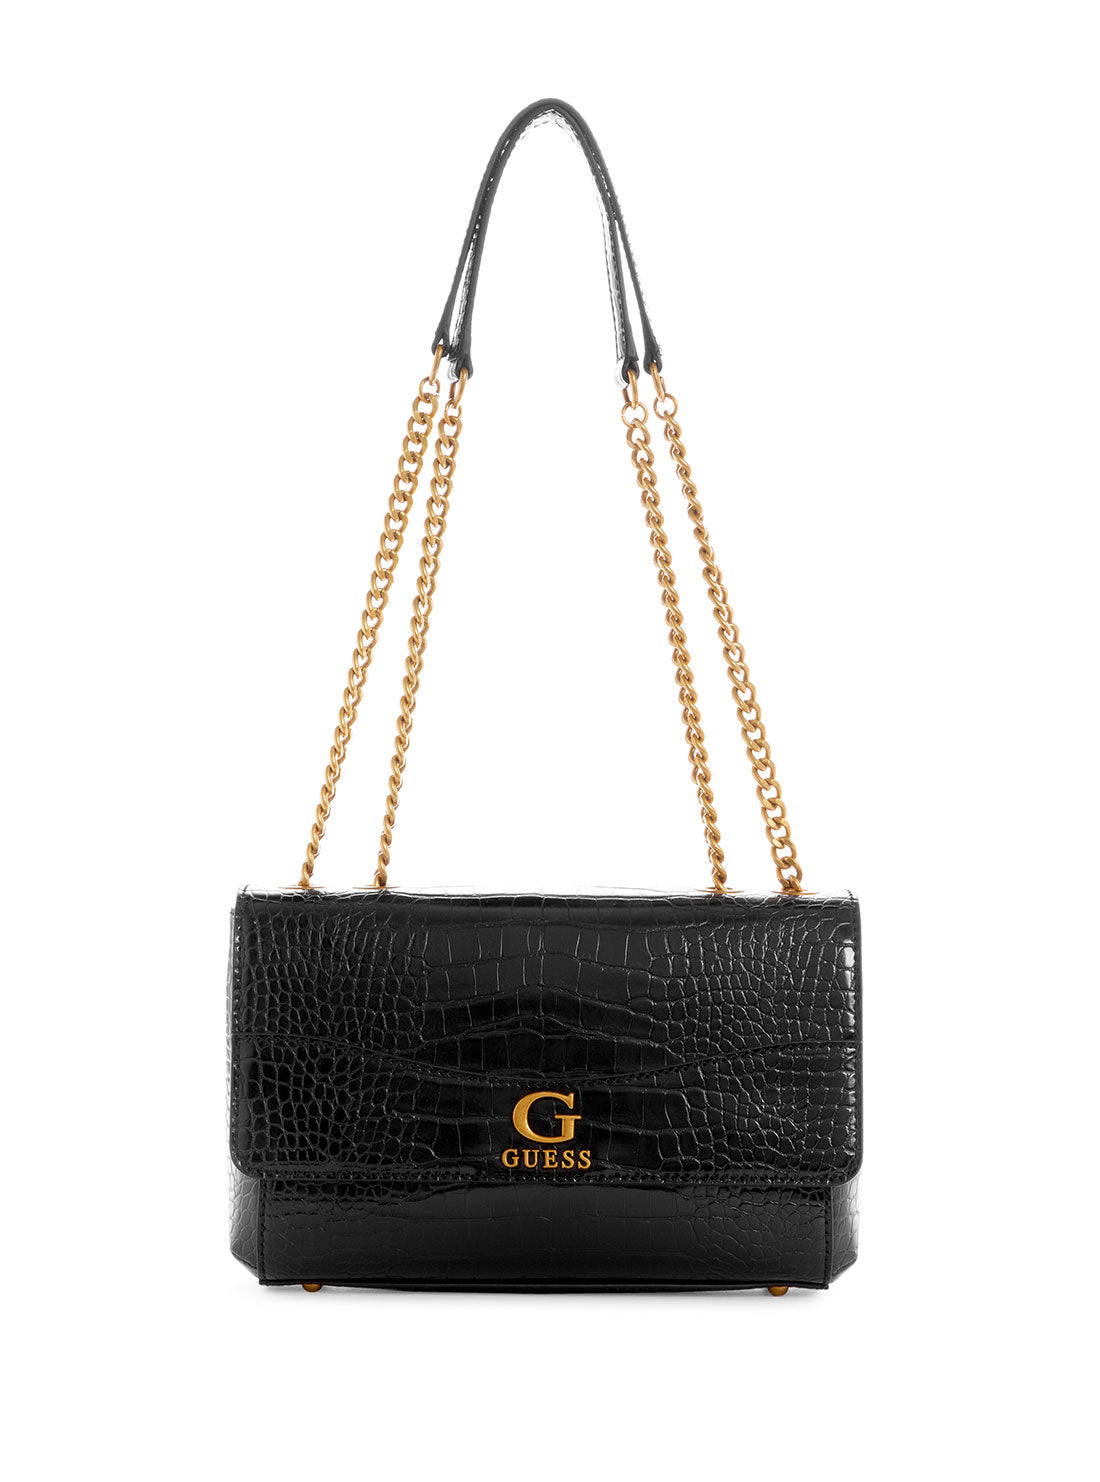 GUESS Women's Black Nell Croco Crossbody Bag CB873621 Front View